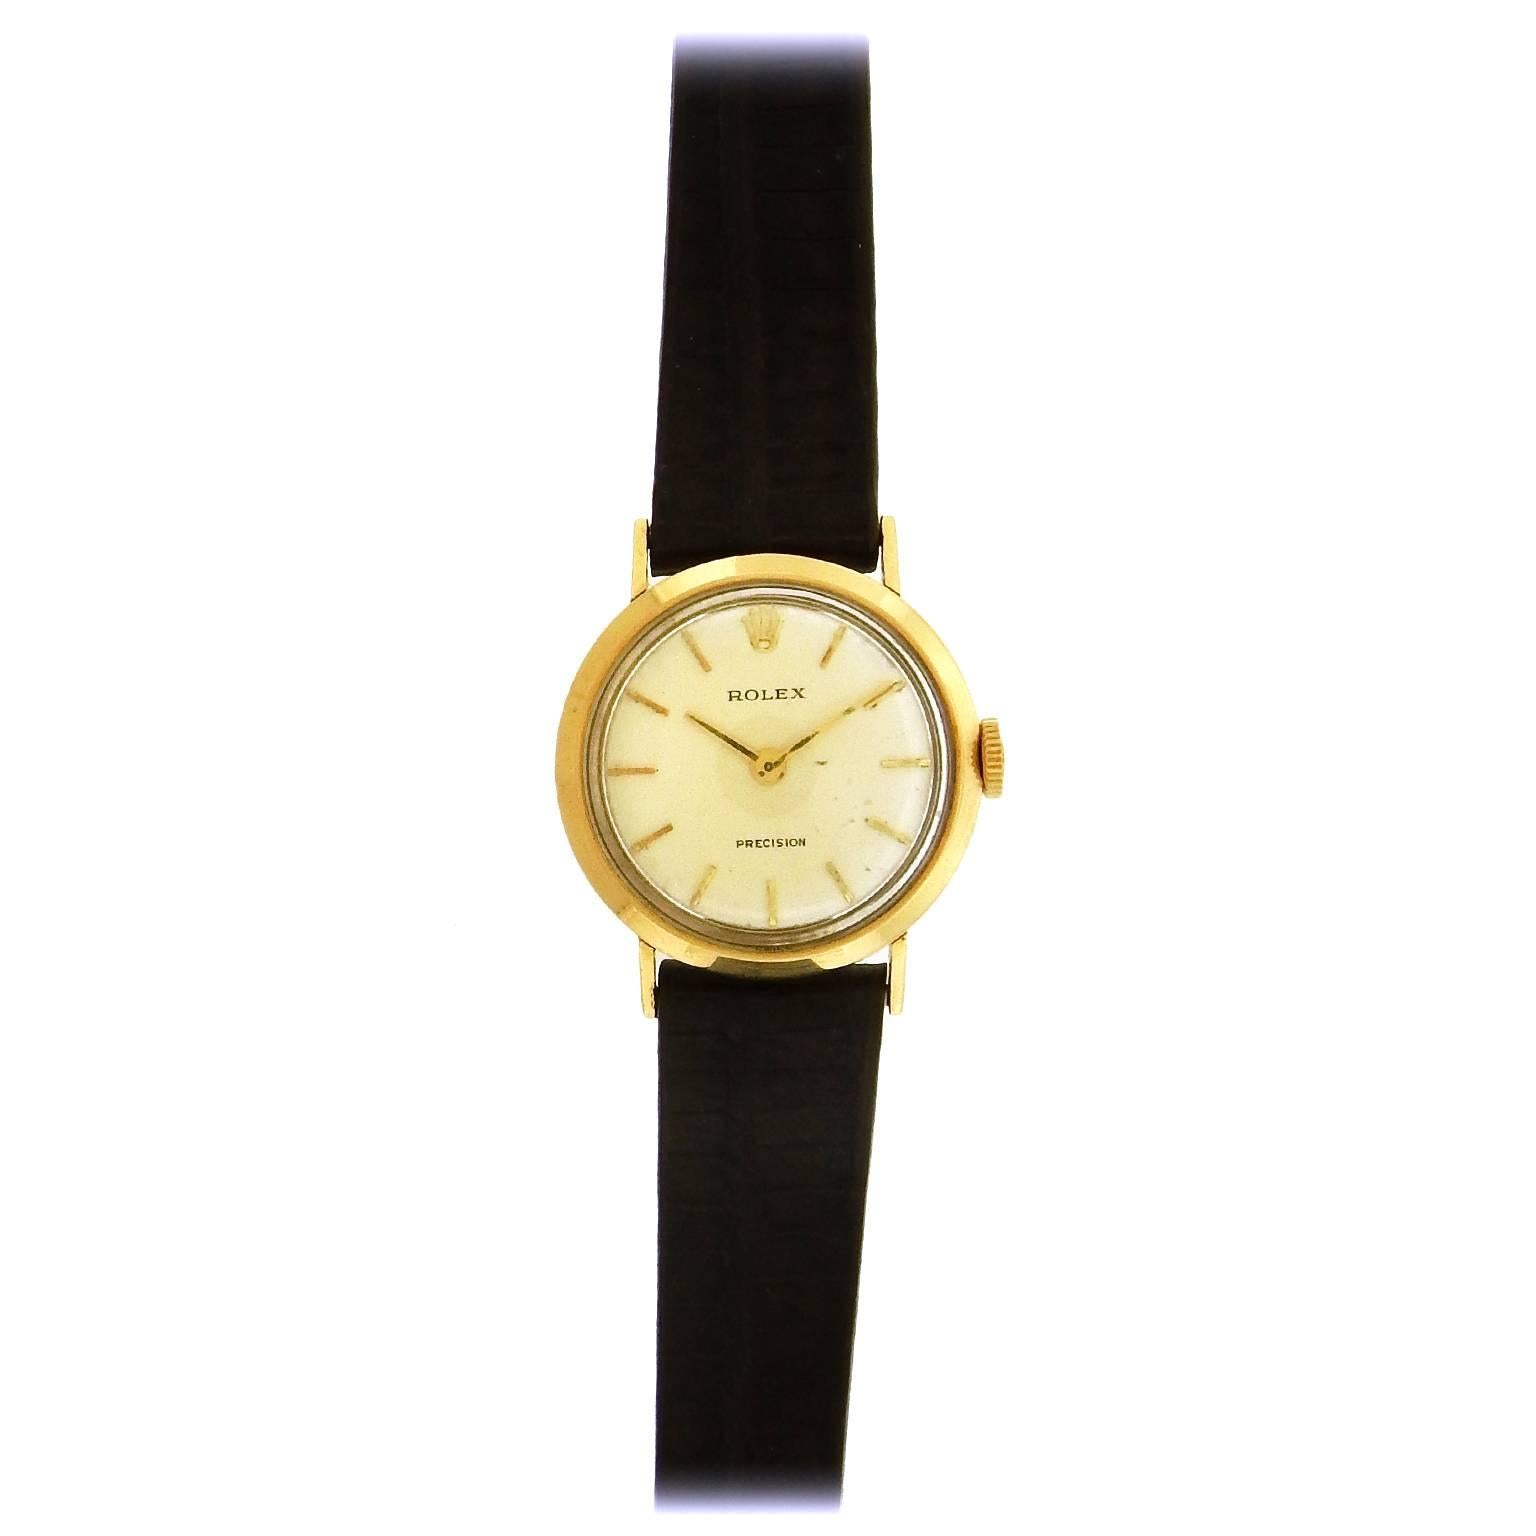 18K yellow gold women's Rolex Precision, circa 1960,  manual wind wristwatch, 23mm diameter, features a silvered dial with applied gold hour indexes, gold baton hands.  The mechanical manual wind movement is warrantied by Aaron Faber for 1 year.